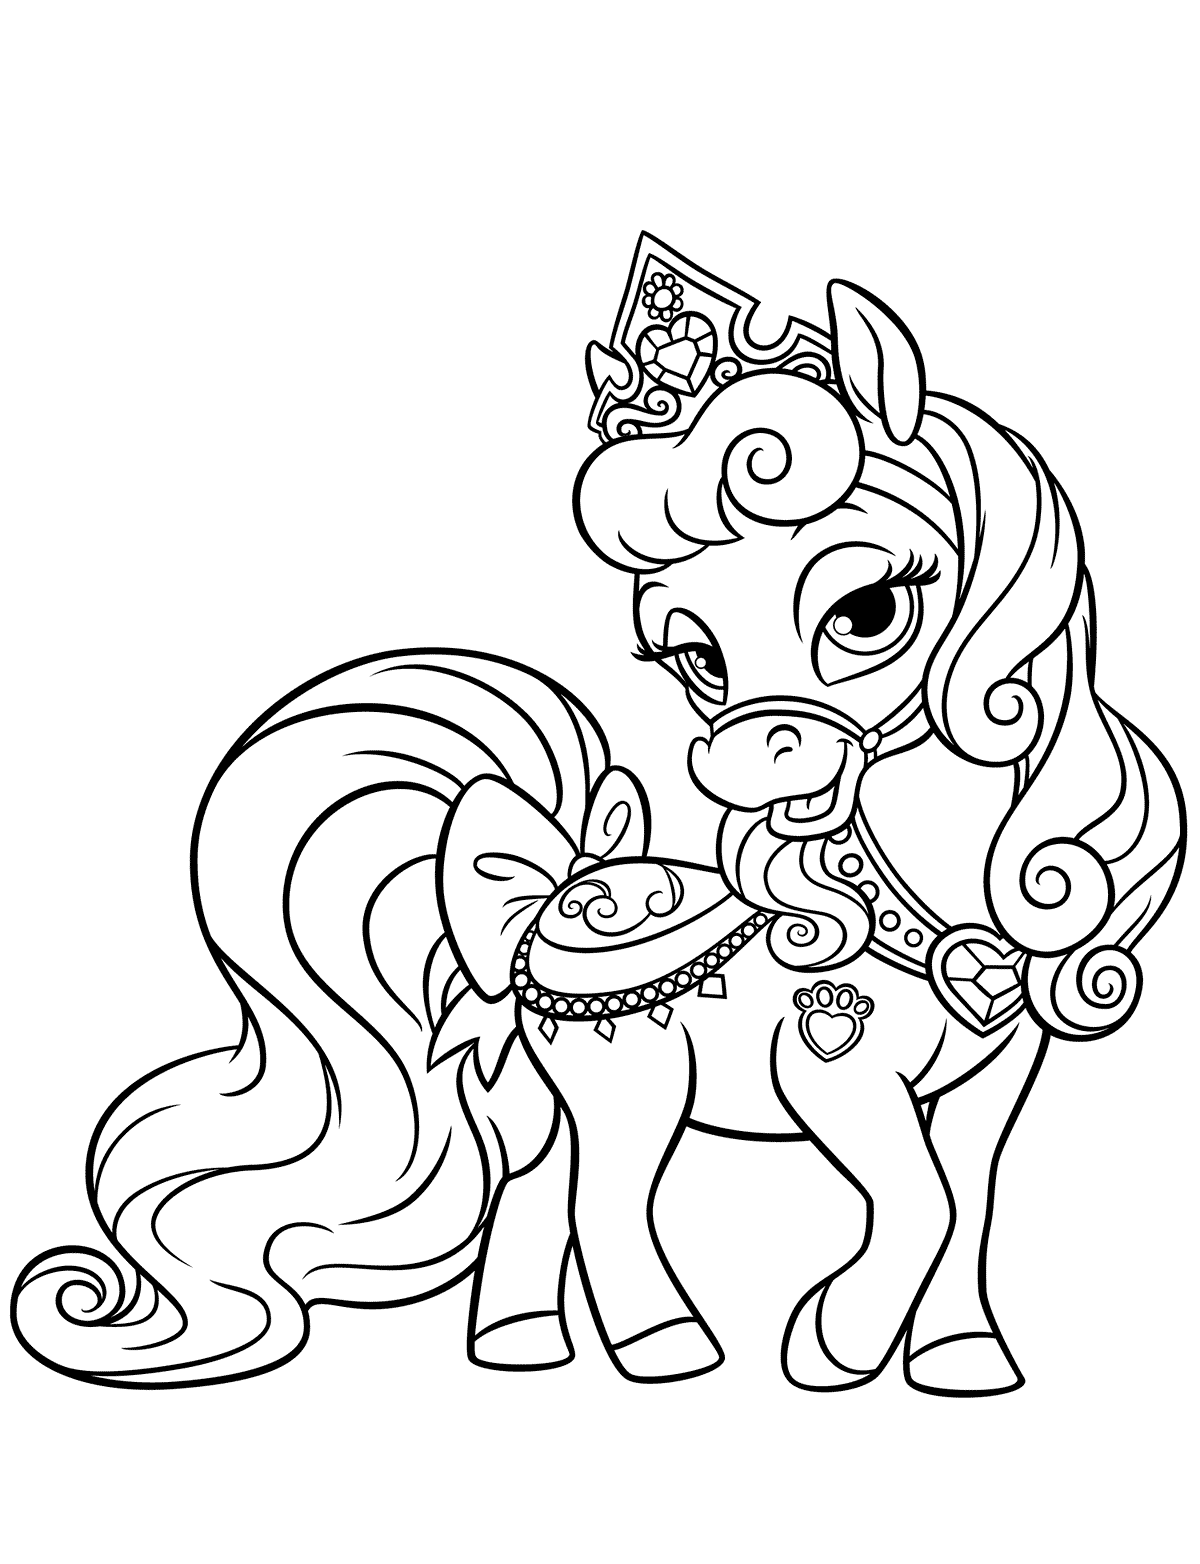 Coloring page - Caramels ponies